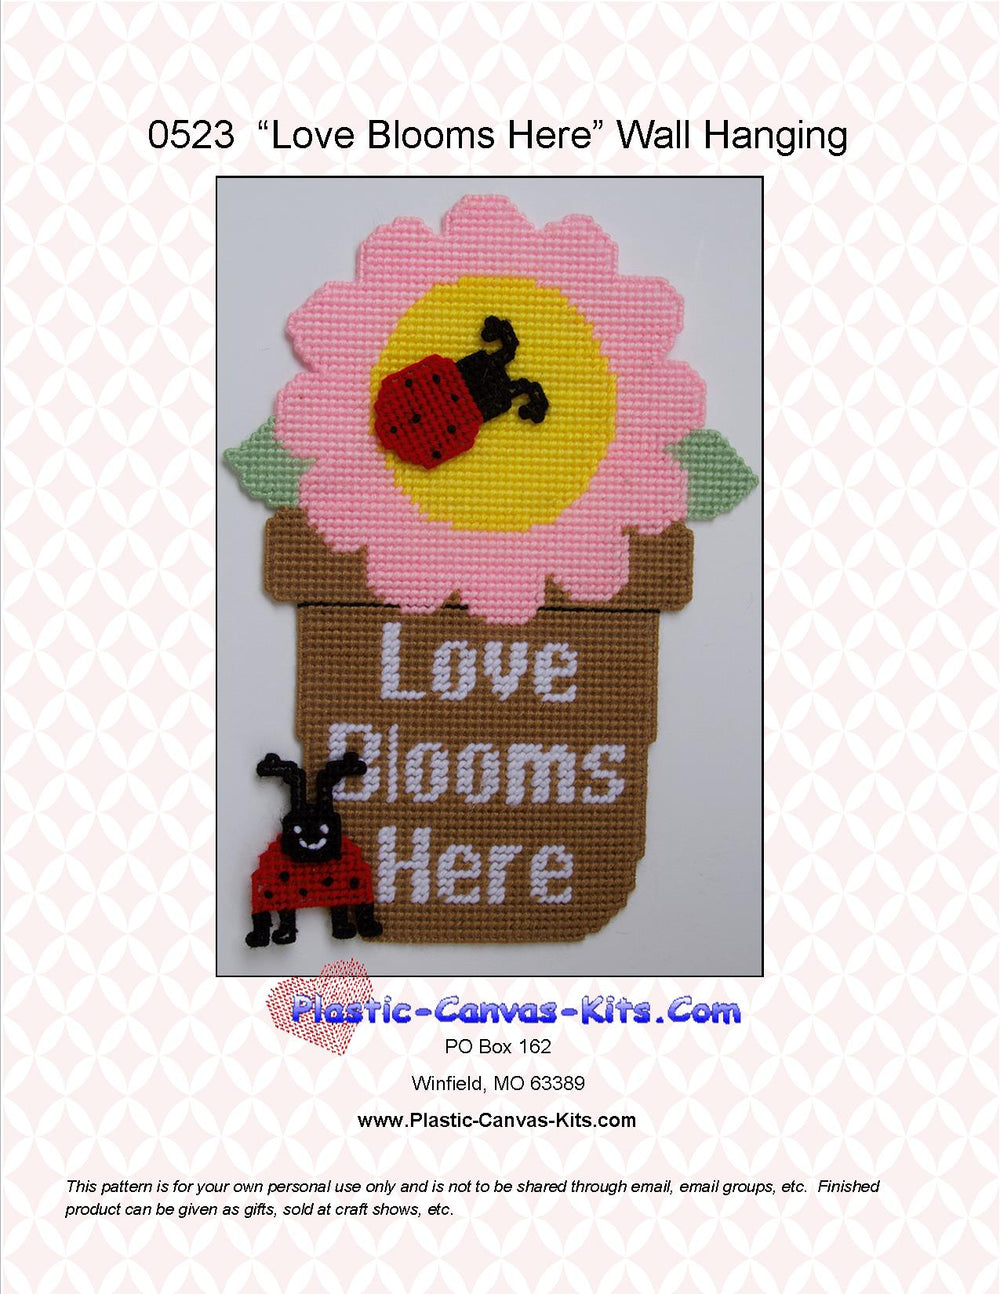 Love Blooms Here Wall Hanging